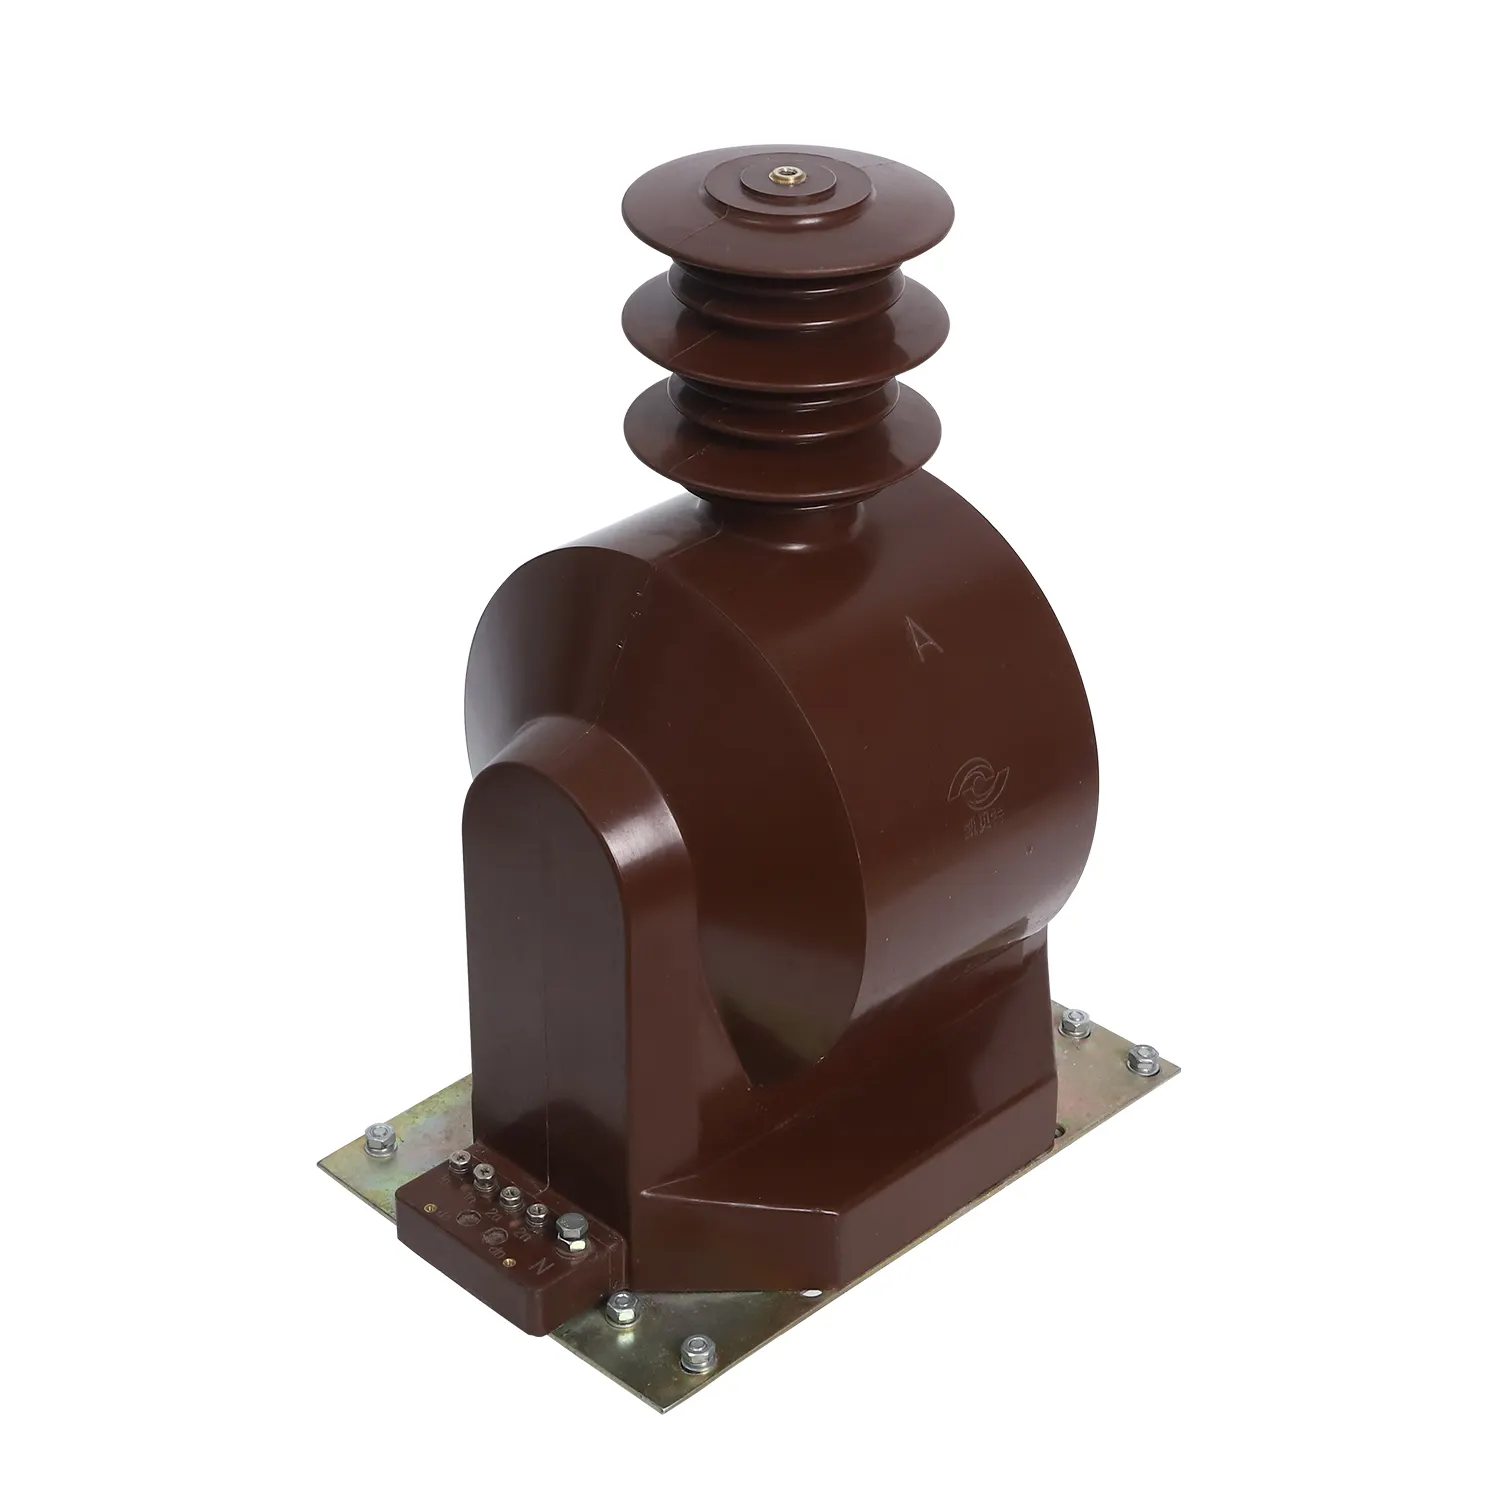 JDZX F 9-35G/JDZ F 9-35 All Insulation Separation Of Measuring And Monitoring voltage transformer dry type